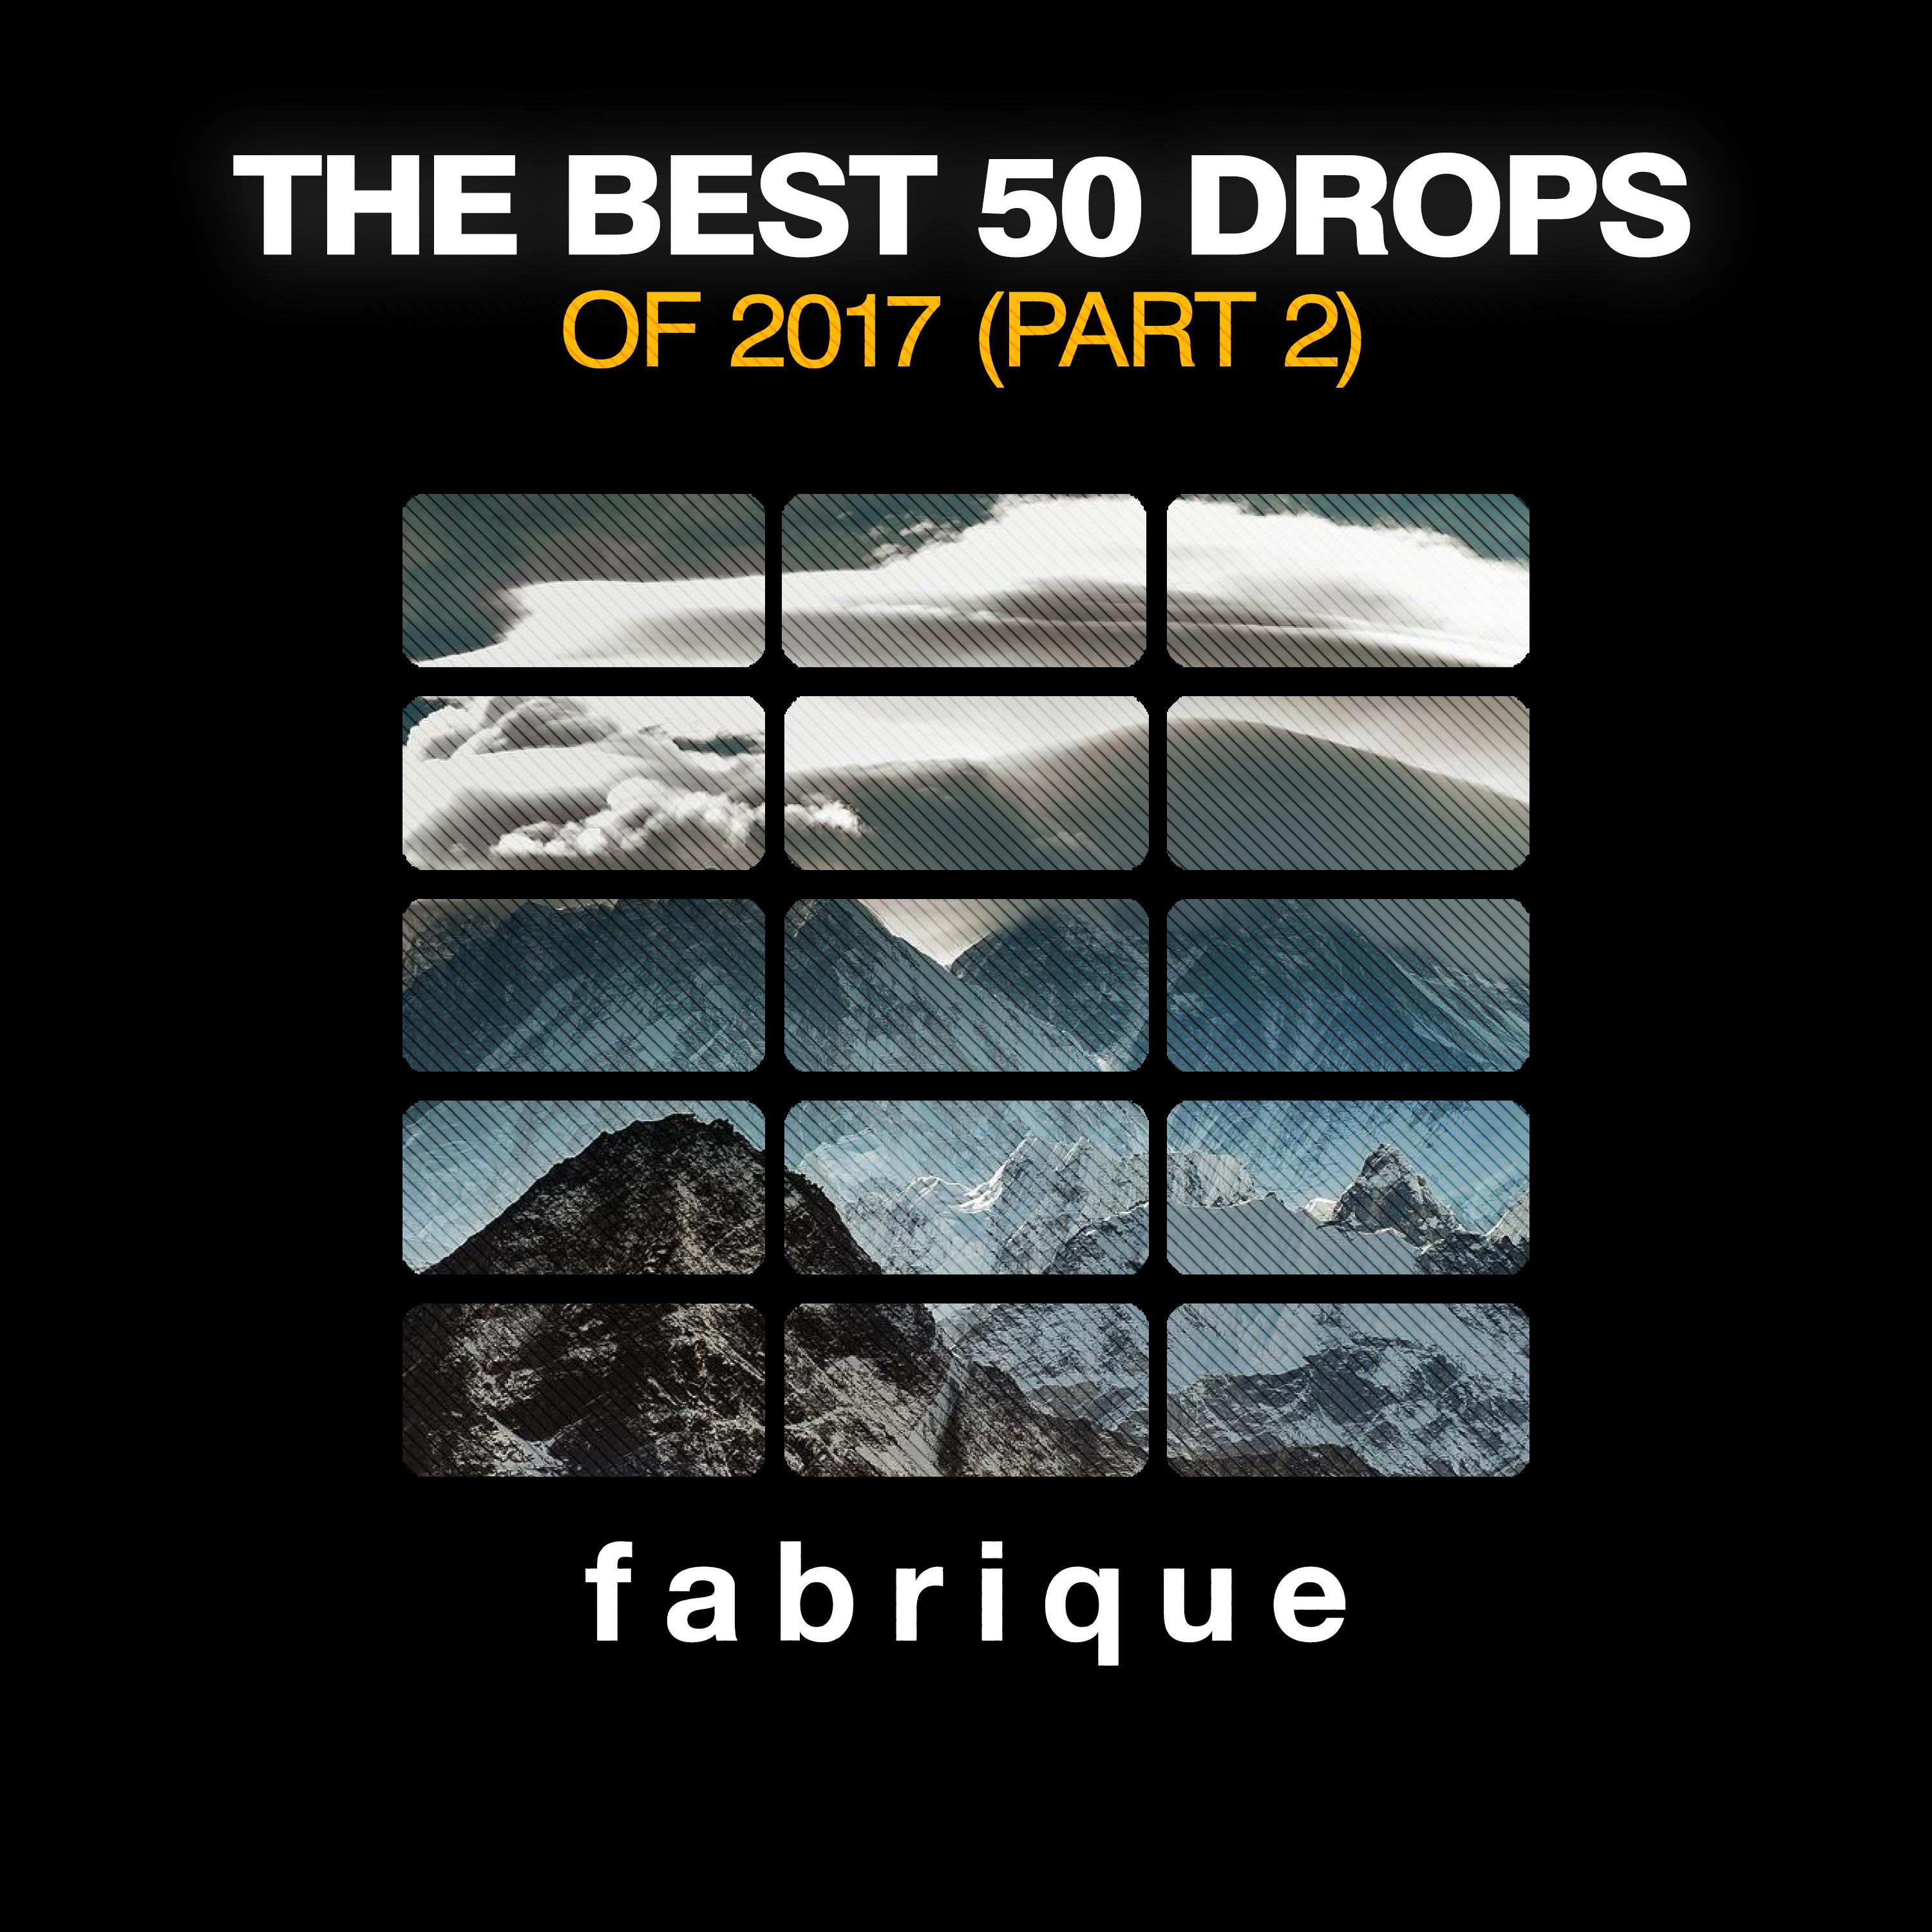 The Best 50 Drops of 2017 (Pt. 2)